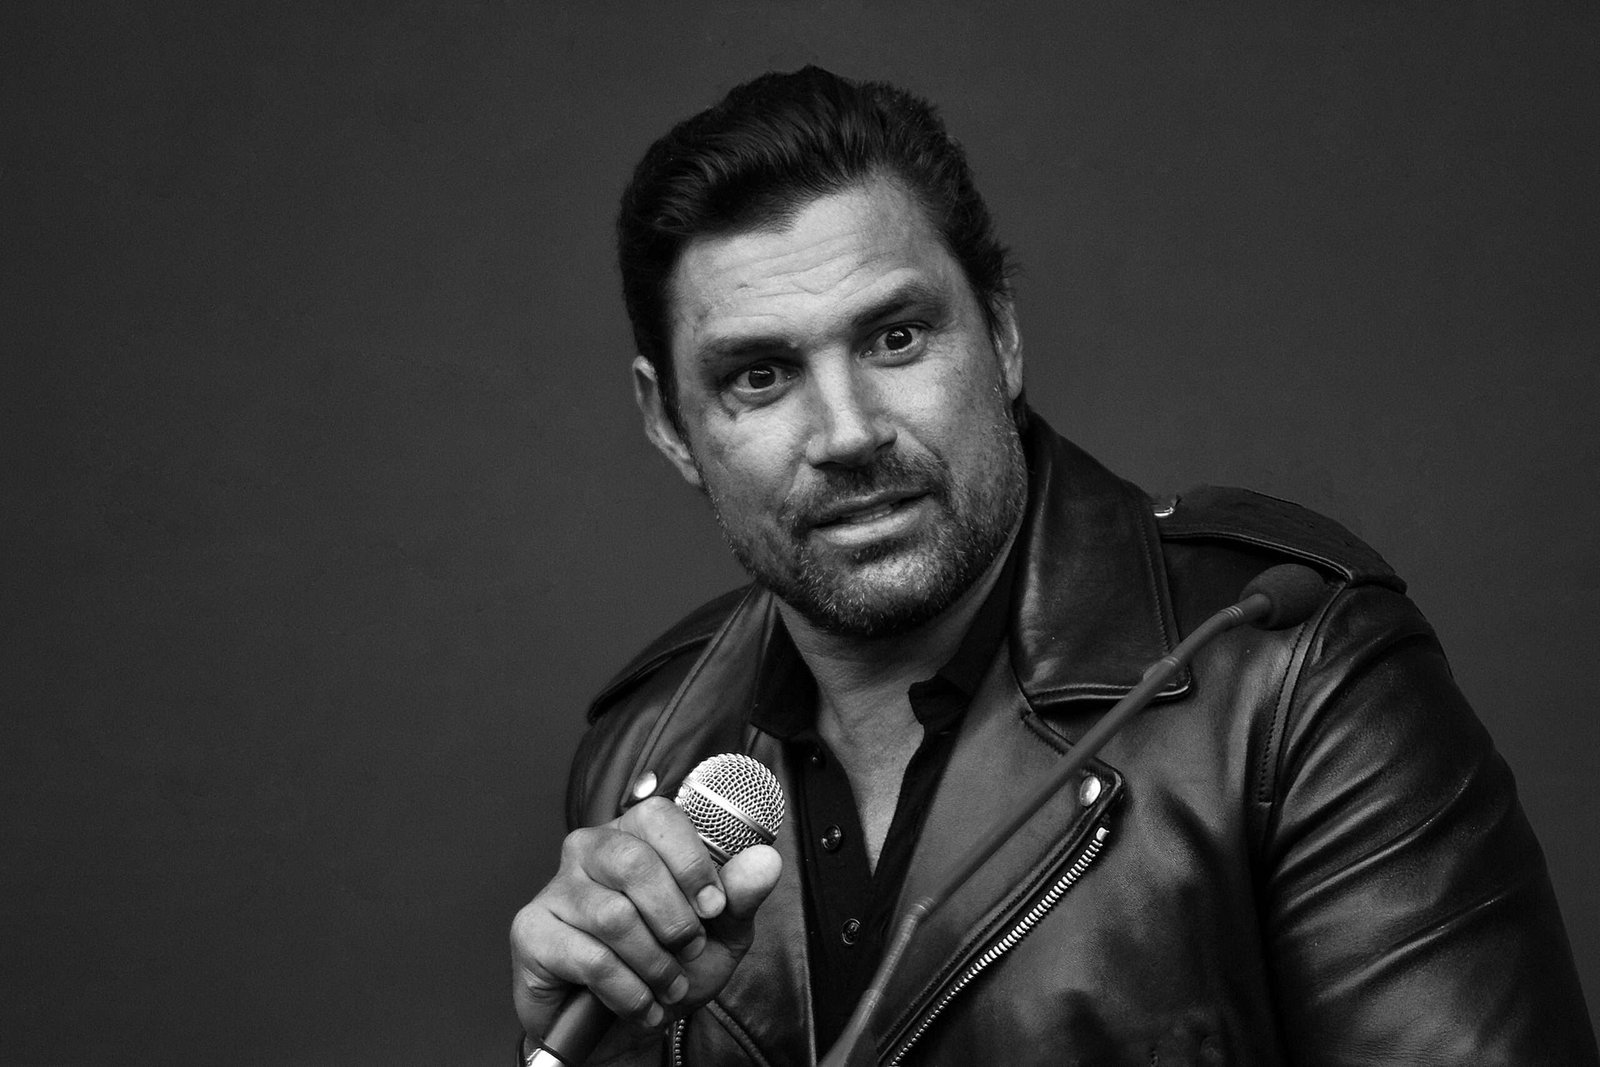 Manu Bennett is primarily known for portraying characters in epic fantasy works, such as Crixus in the TV series Spartacus, Allanon in The Shannara Chronicles, Slade Wilson / Deathstroke in Arrow, and Azog the Defiler in The Hobbit trilogy. Ghost photographed him at the Facts Convention Ghent (Spring edition) in 2018.